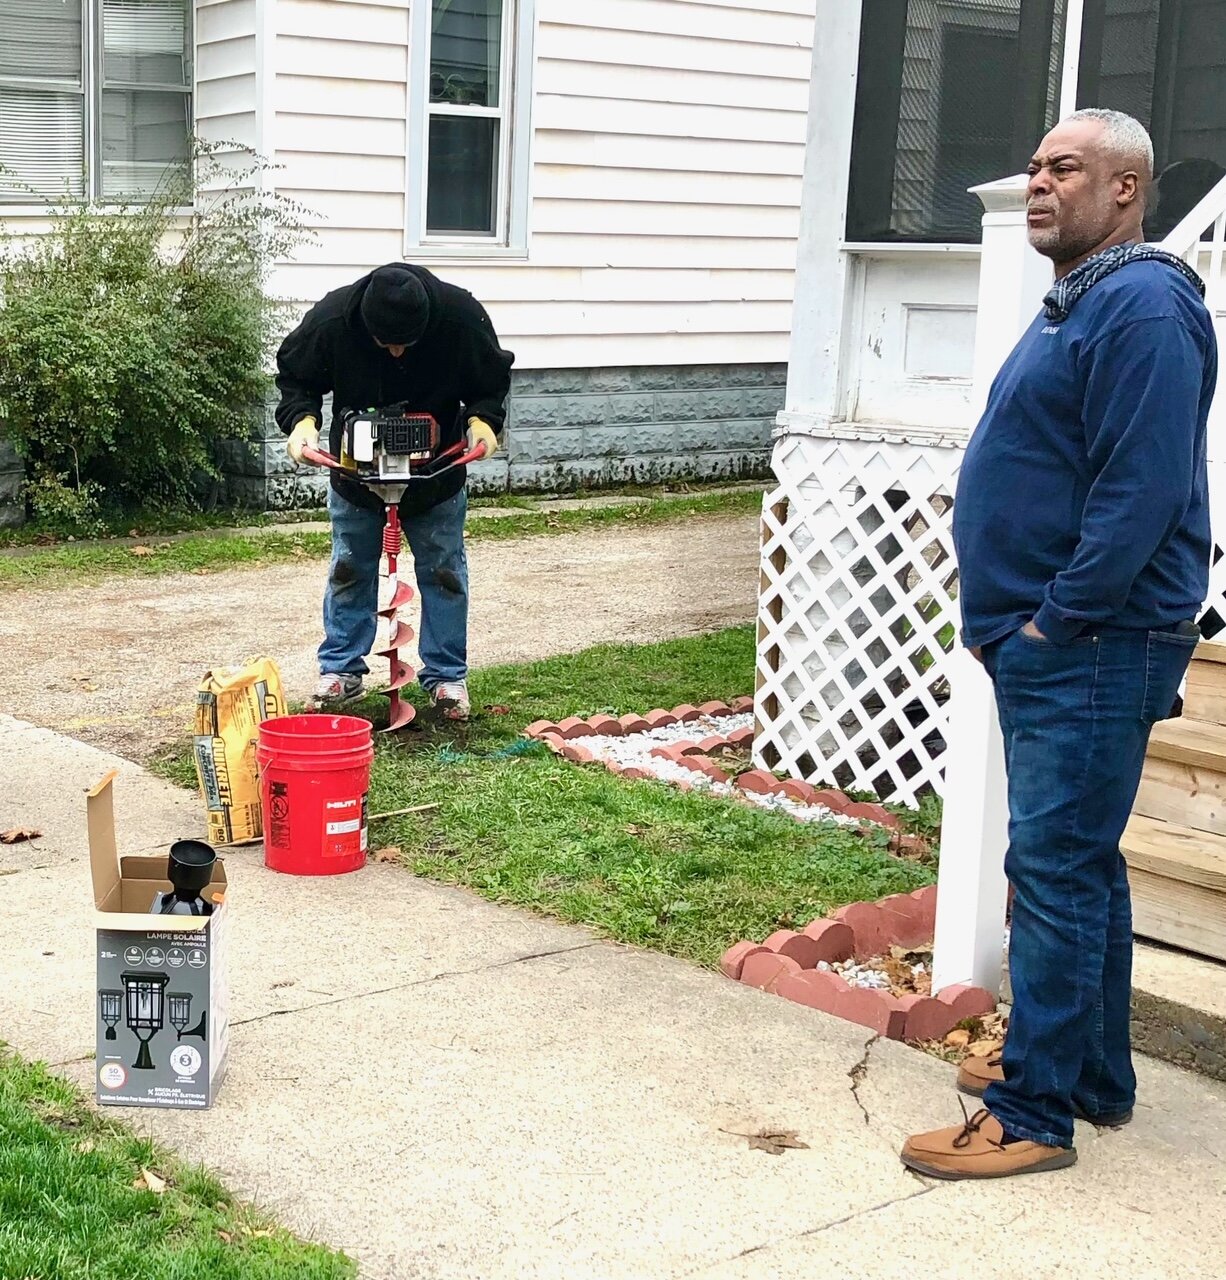 Damion Henderson uses a post hole digger to begin the installation of a solar lamp post in front of the Mabel Street home of Richard Cox IV, at right. The men were photographed as the solar lighting project began in fall of 2020.